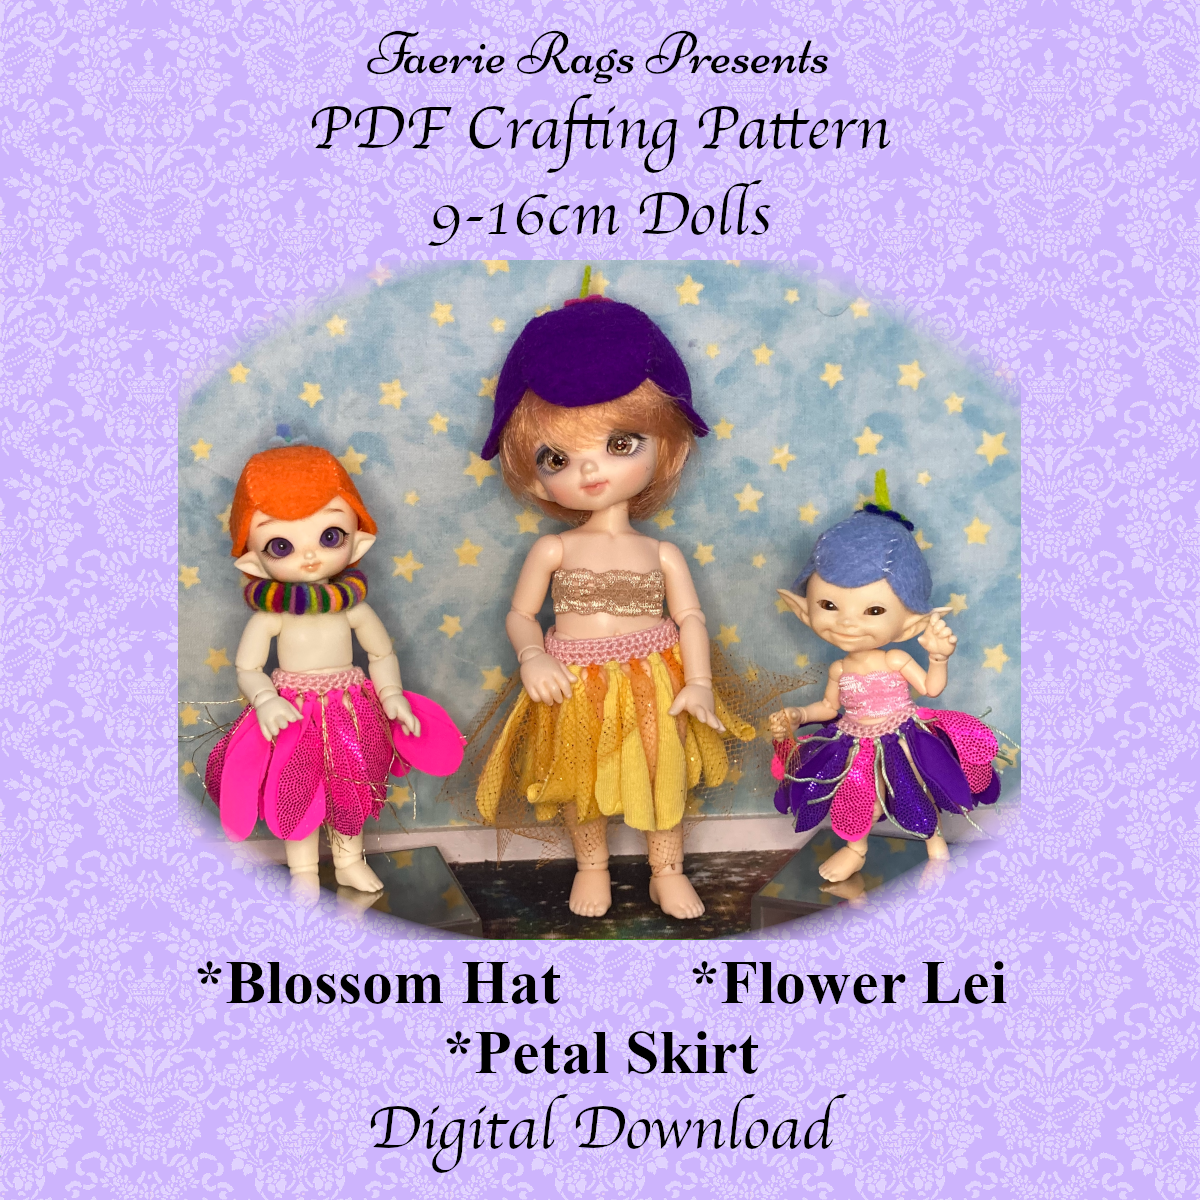 Blossom Hat and Petal Skirt